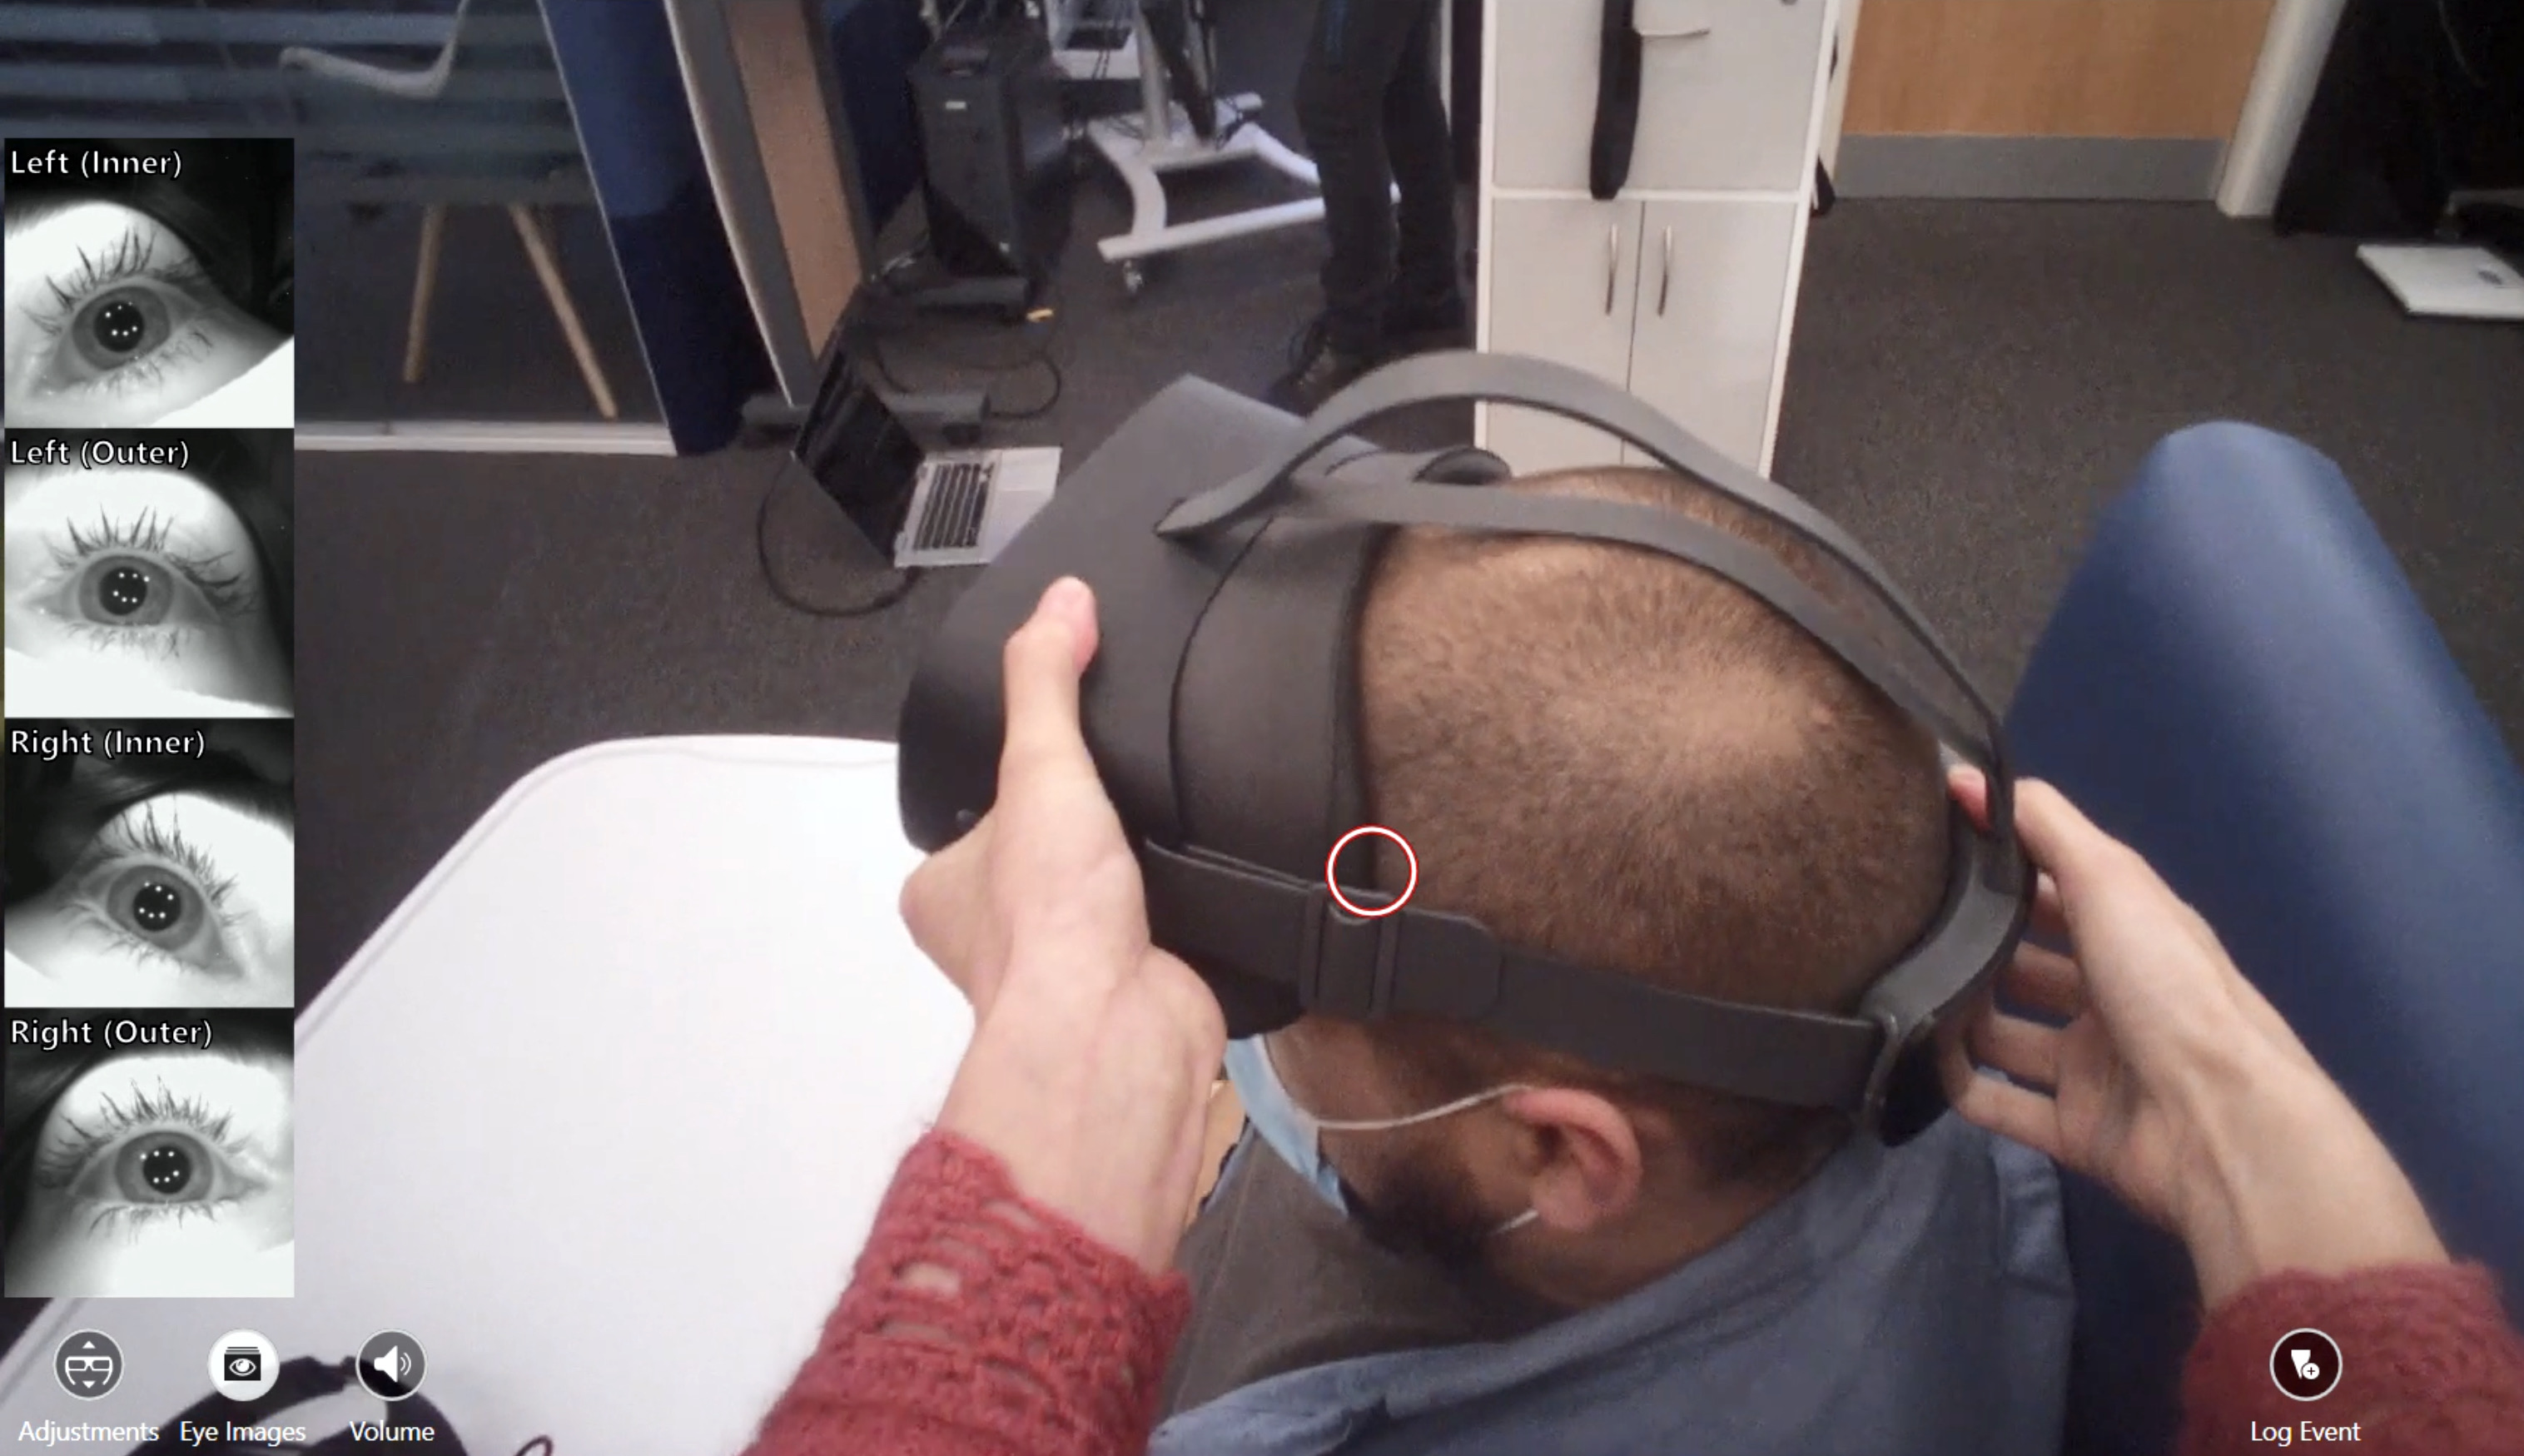 An example of the VR headset